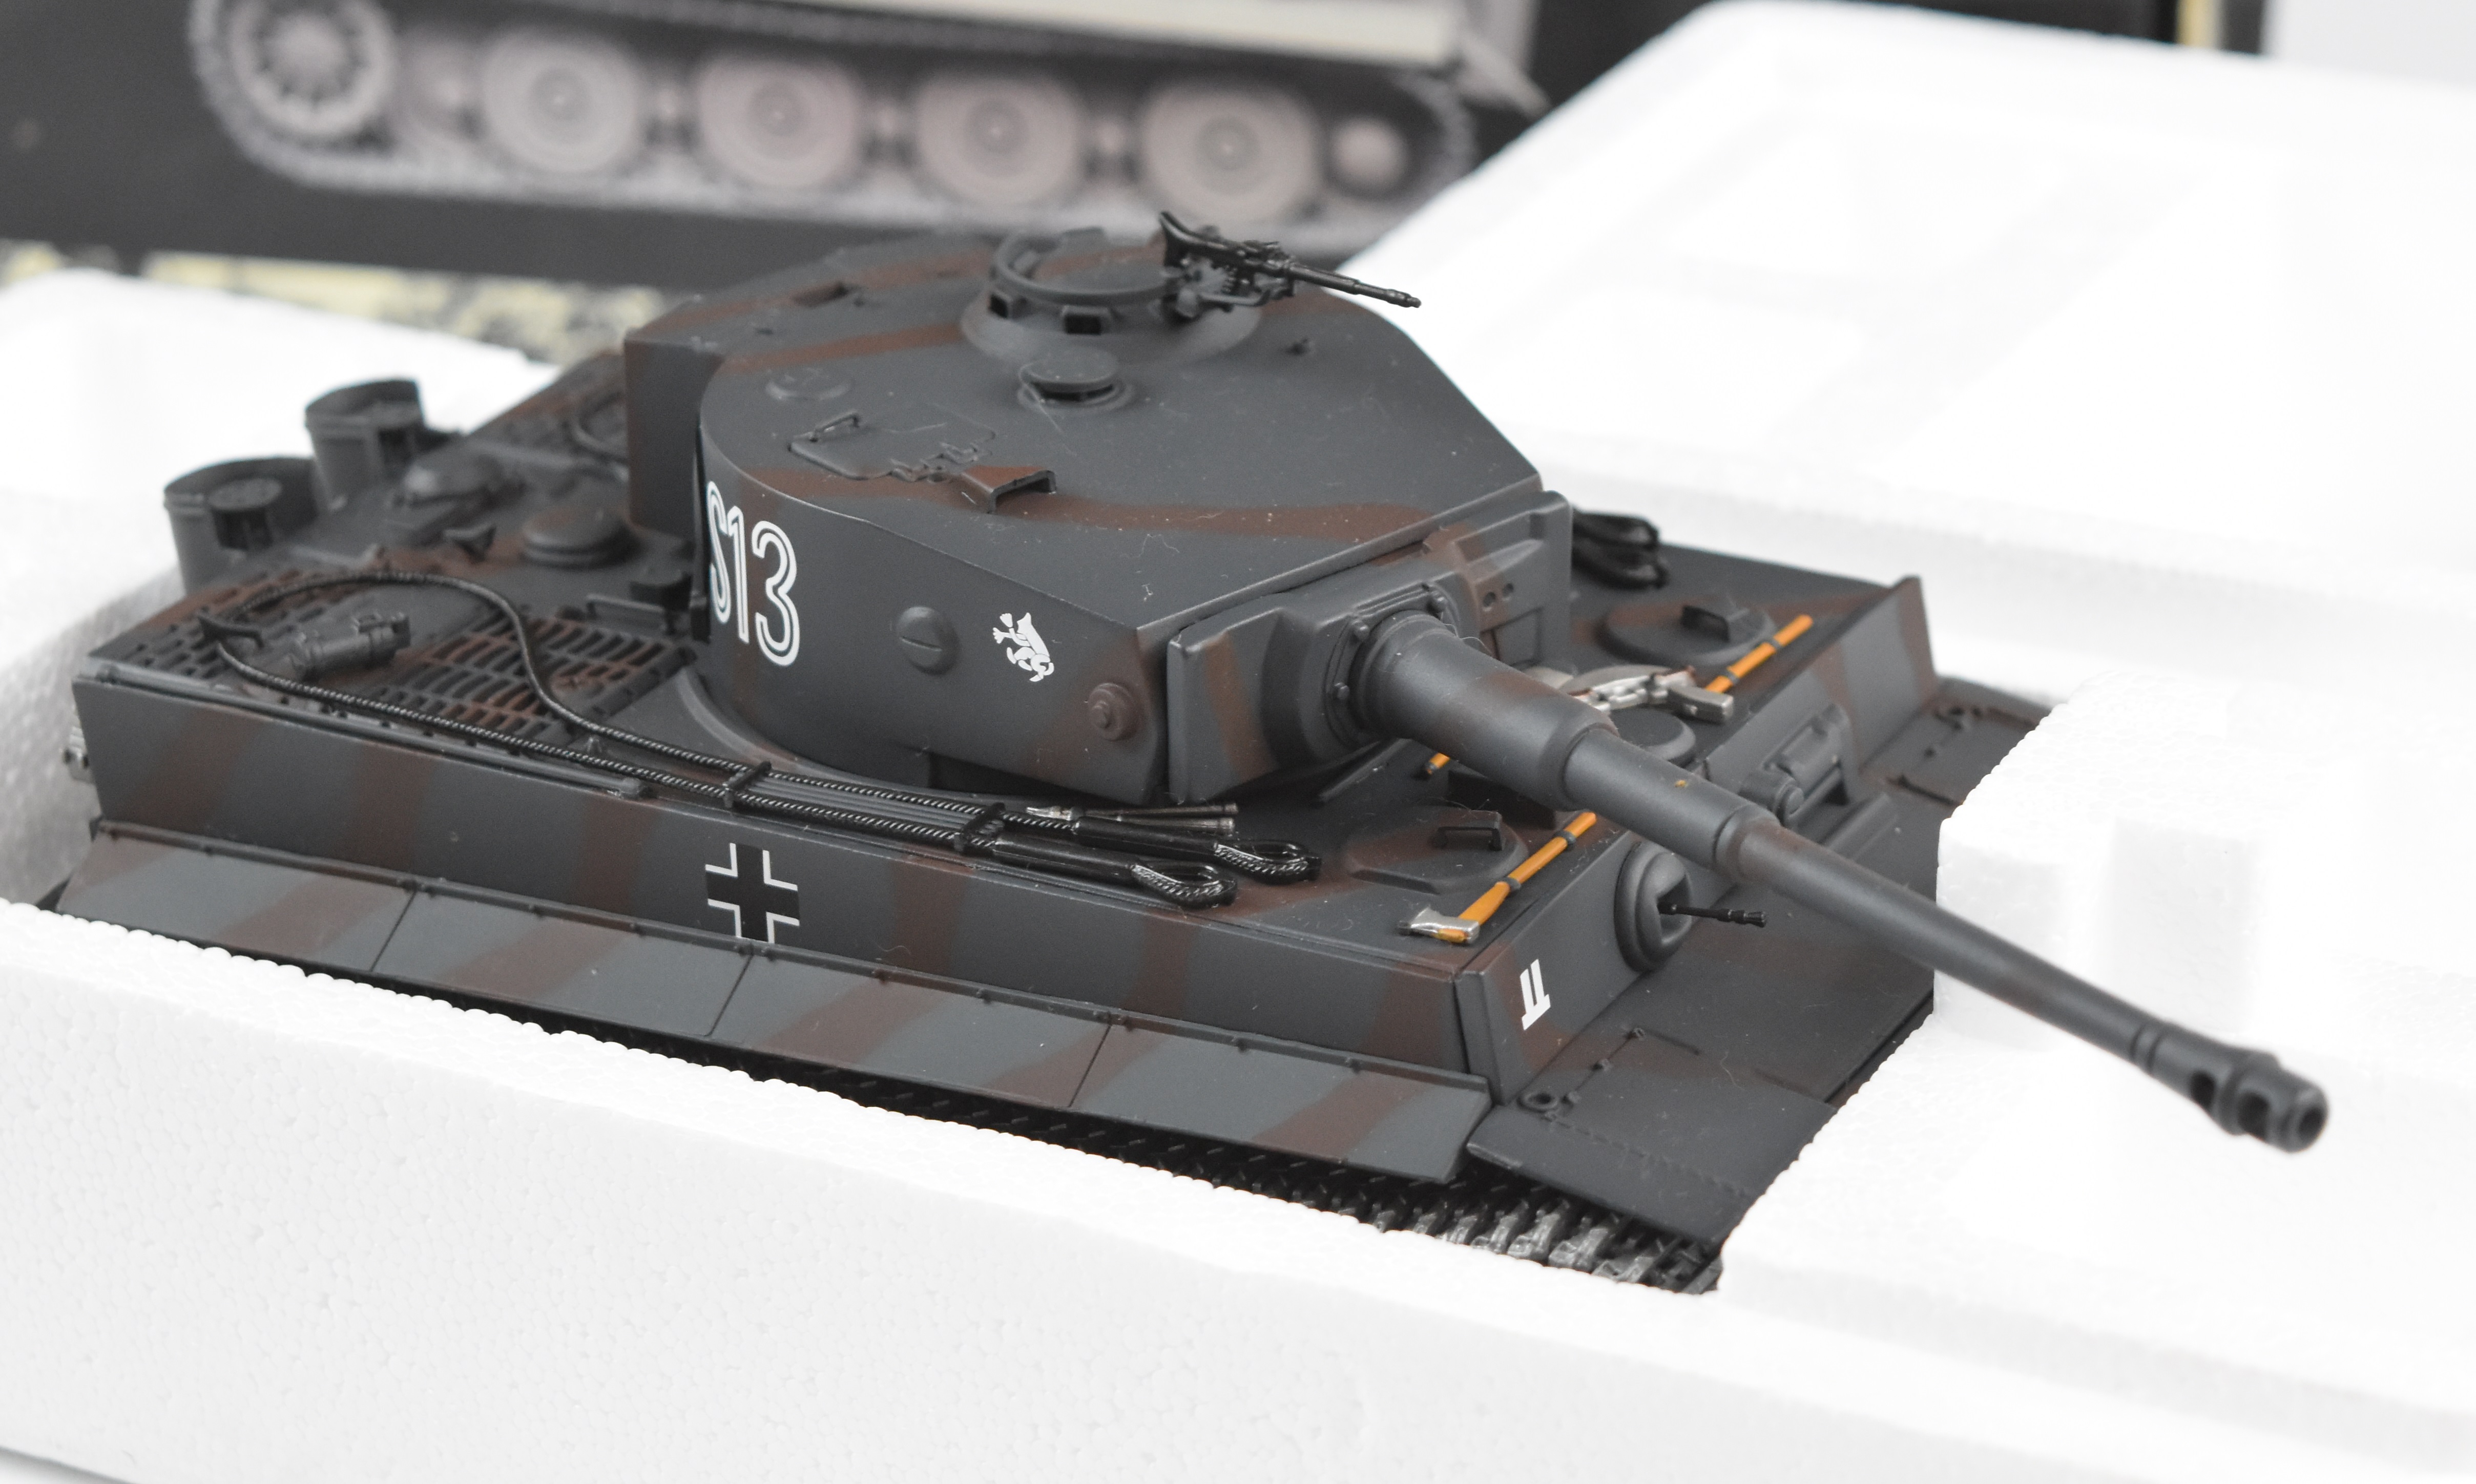 Three Minichamps 1:35 scale diecast model tanks comprising three variations of The - Image 2 of 7